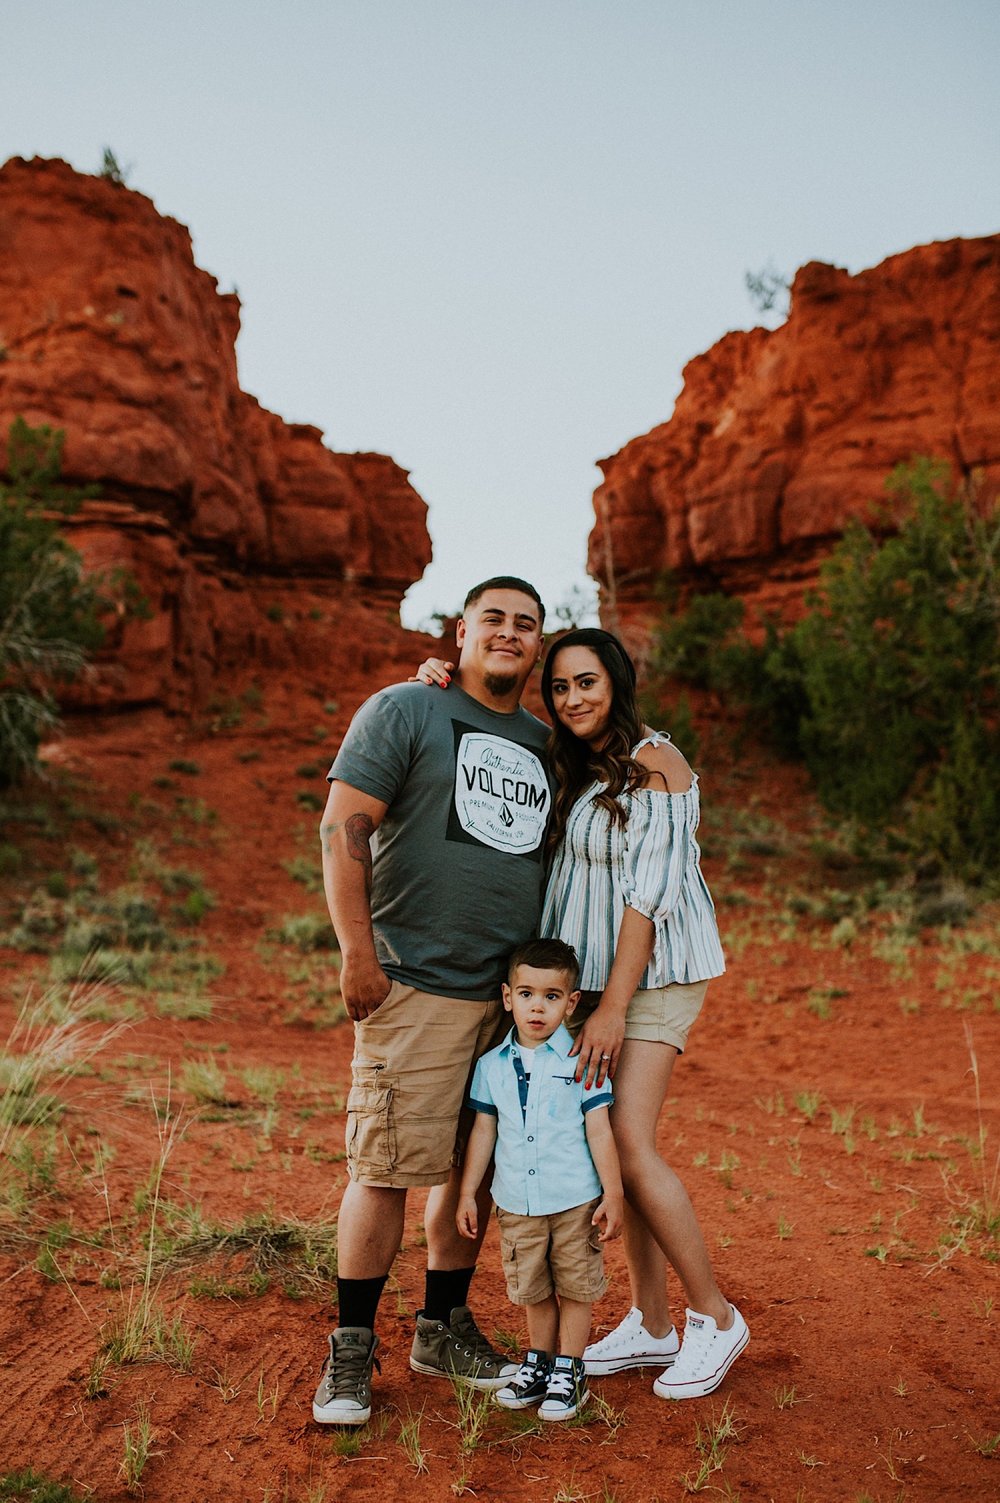  We went on a road trip for Kayla and Dillan’s summer engagement photos at the Jemez Red Rocks in Jemez, New Mexico. There are awesome forest-y areas in Jemez Springs that creates a stunning backdrop of beautiful greenery for gorgeous engagement phot